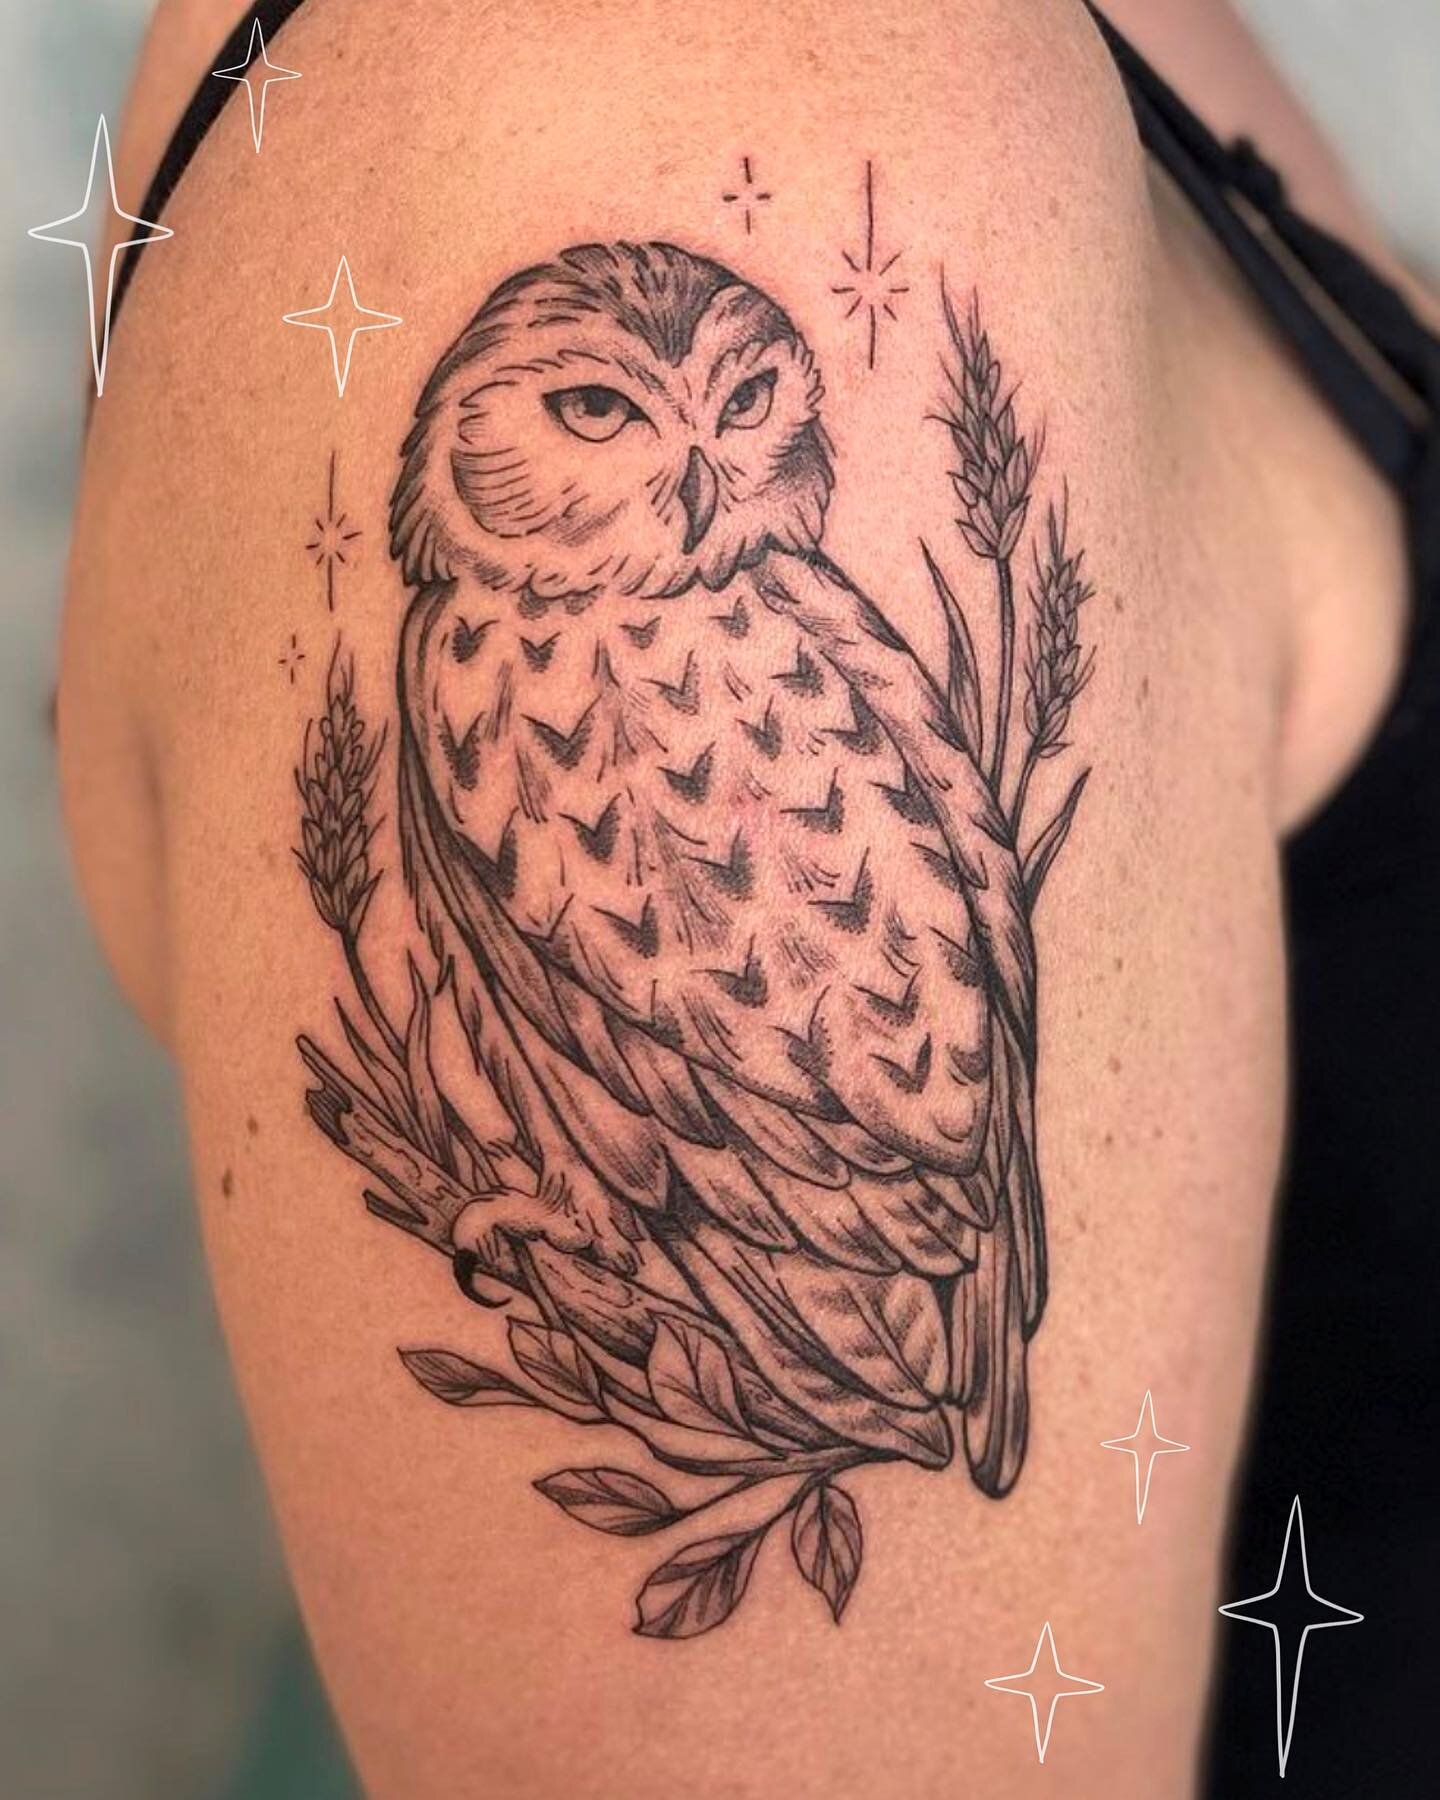 A beautiful Snowy Owl by Sydney @hrtshpdfruit - it&rsquo;s the second part of a dual mother/son tattoo, and the son got the Great Horned Owl we posted previously! 🦉
.
.
.
.
.
#owl #owltattoo #snowyowl #birdtattoo #illustrativetattoo #illustrationtat